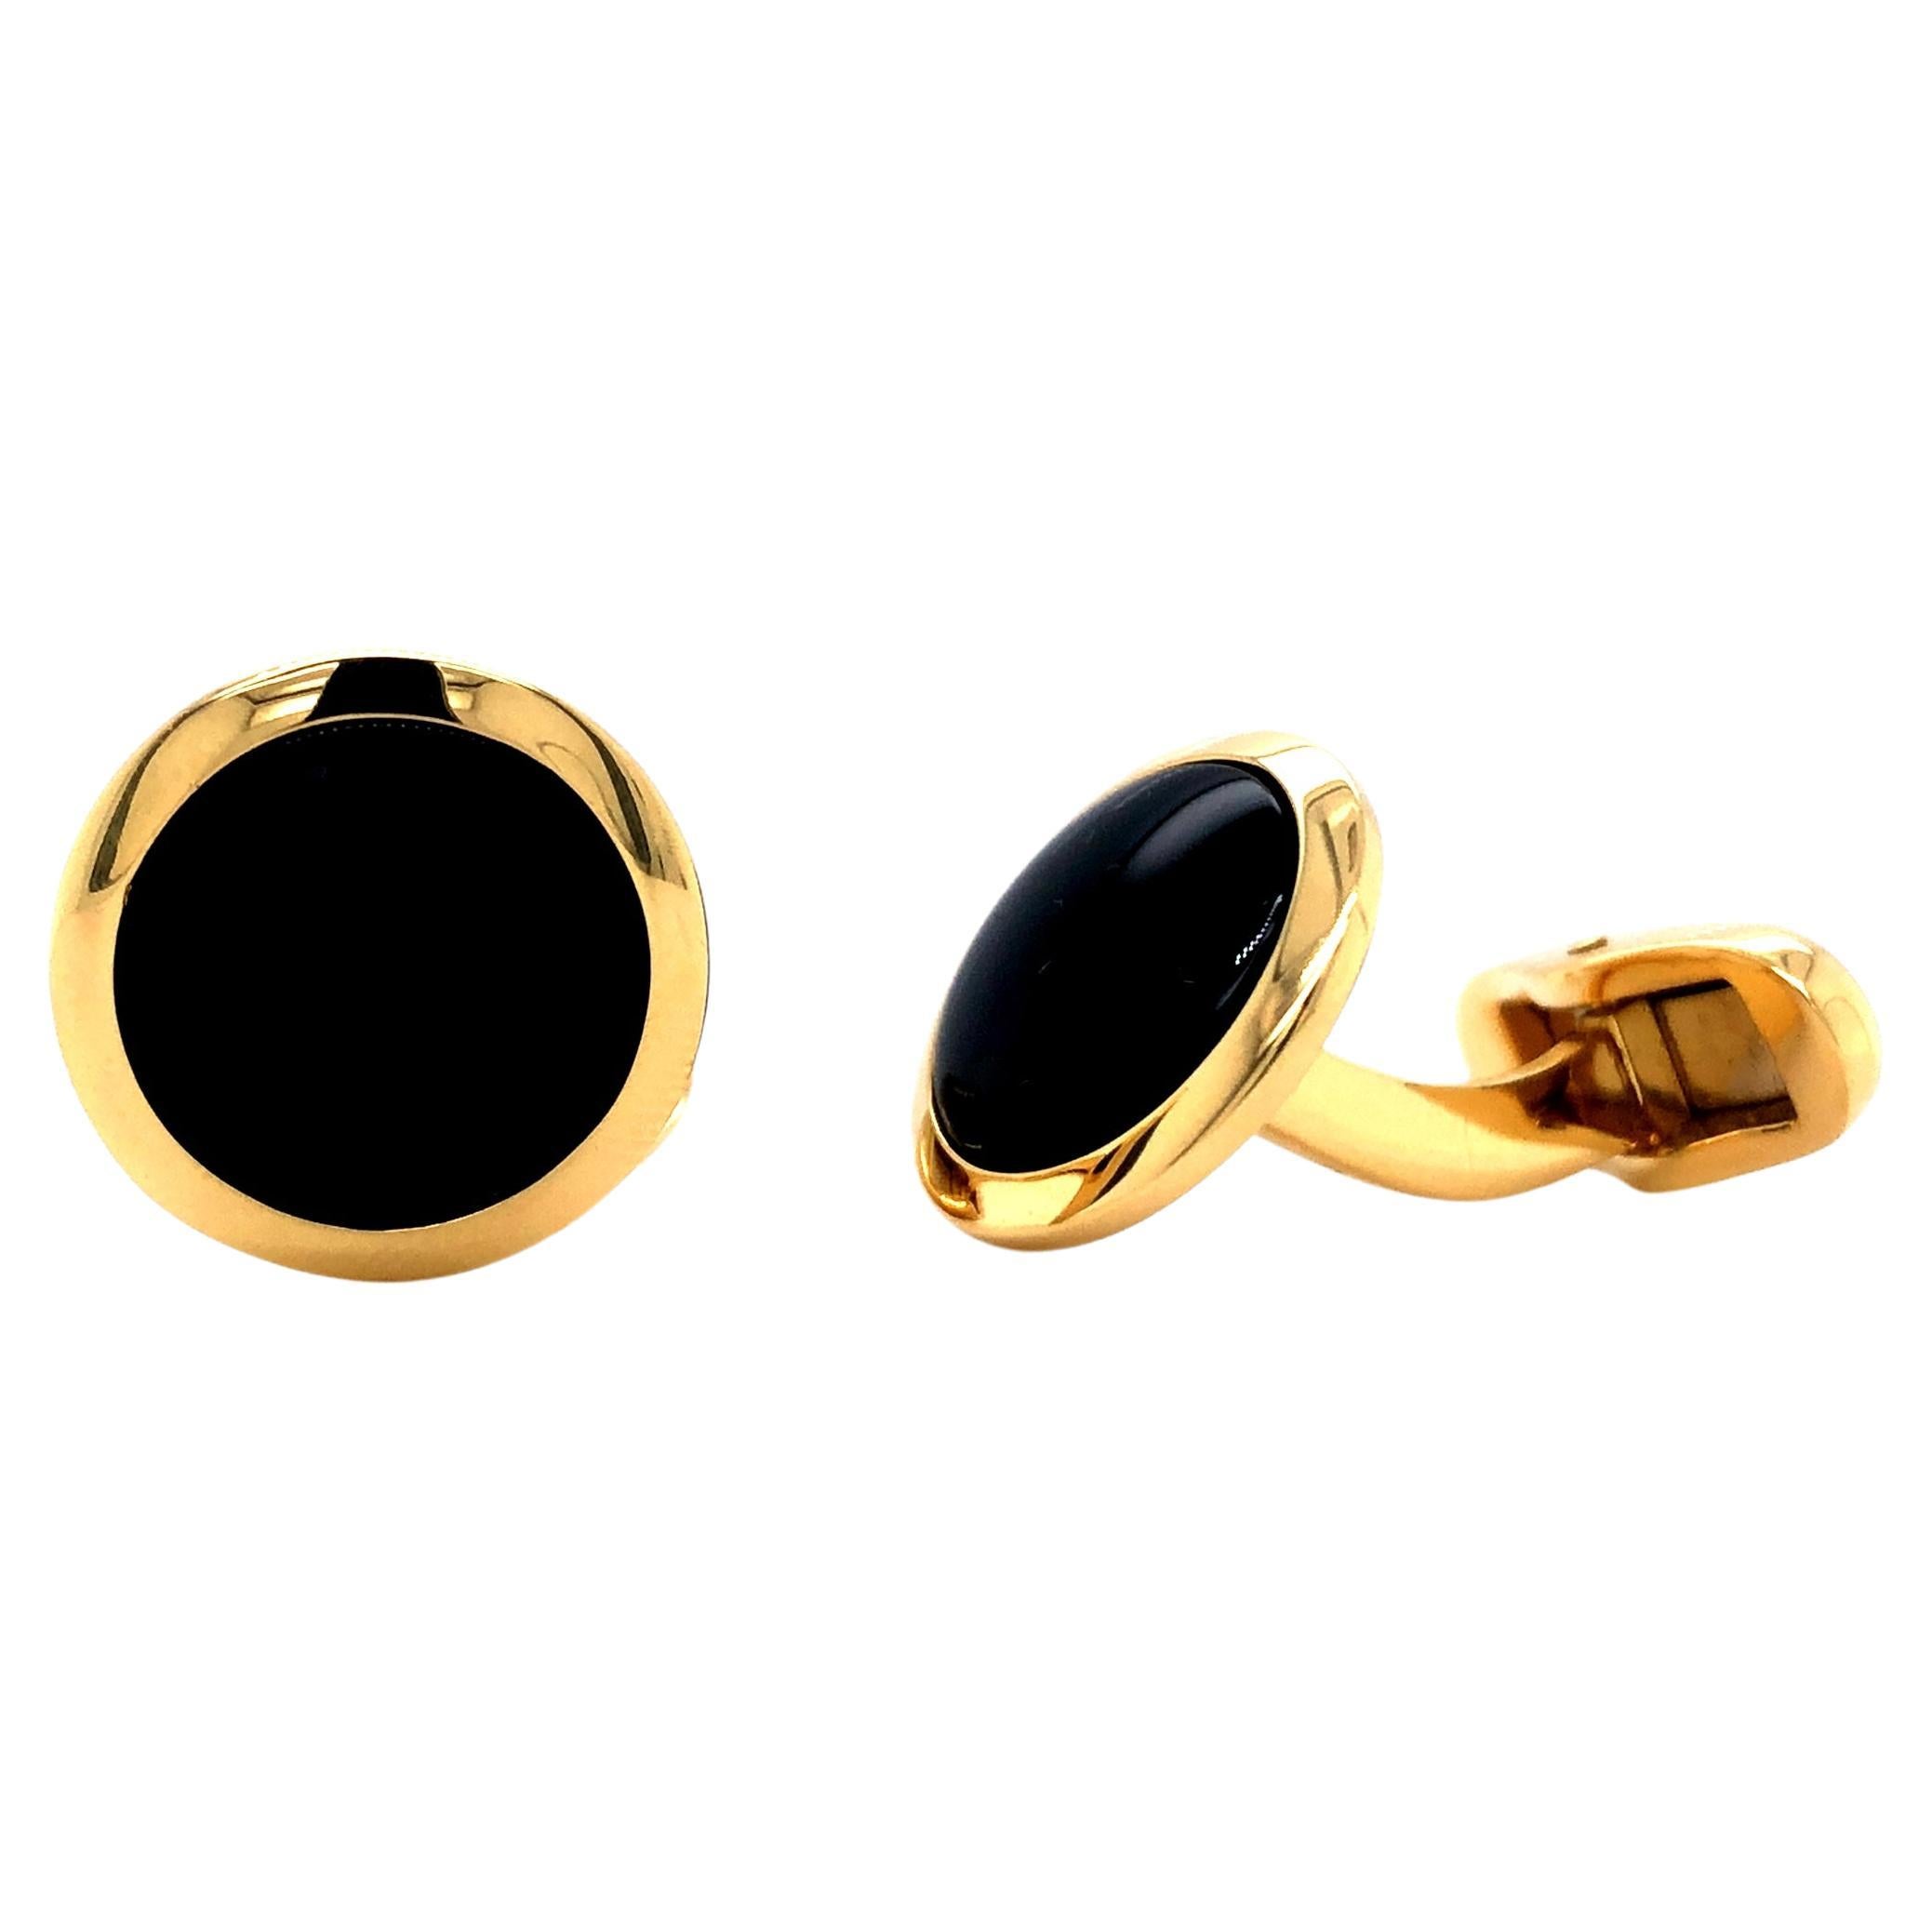 Round Cufflinks with Domed Bezel, 18k Yellow Gold, Onyx Inlays For Sale